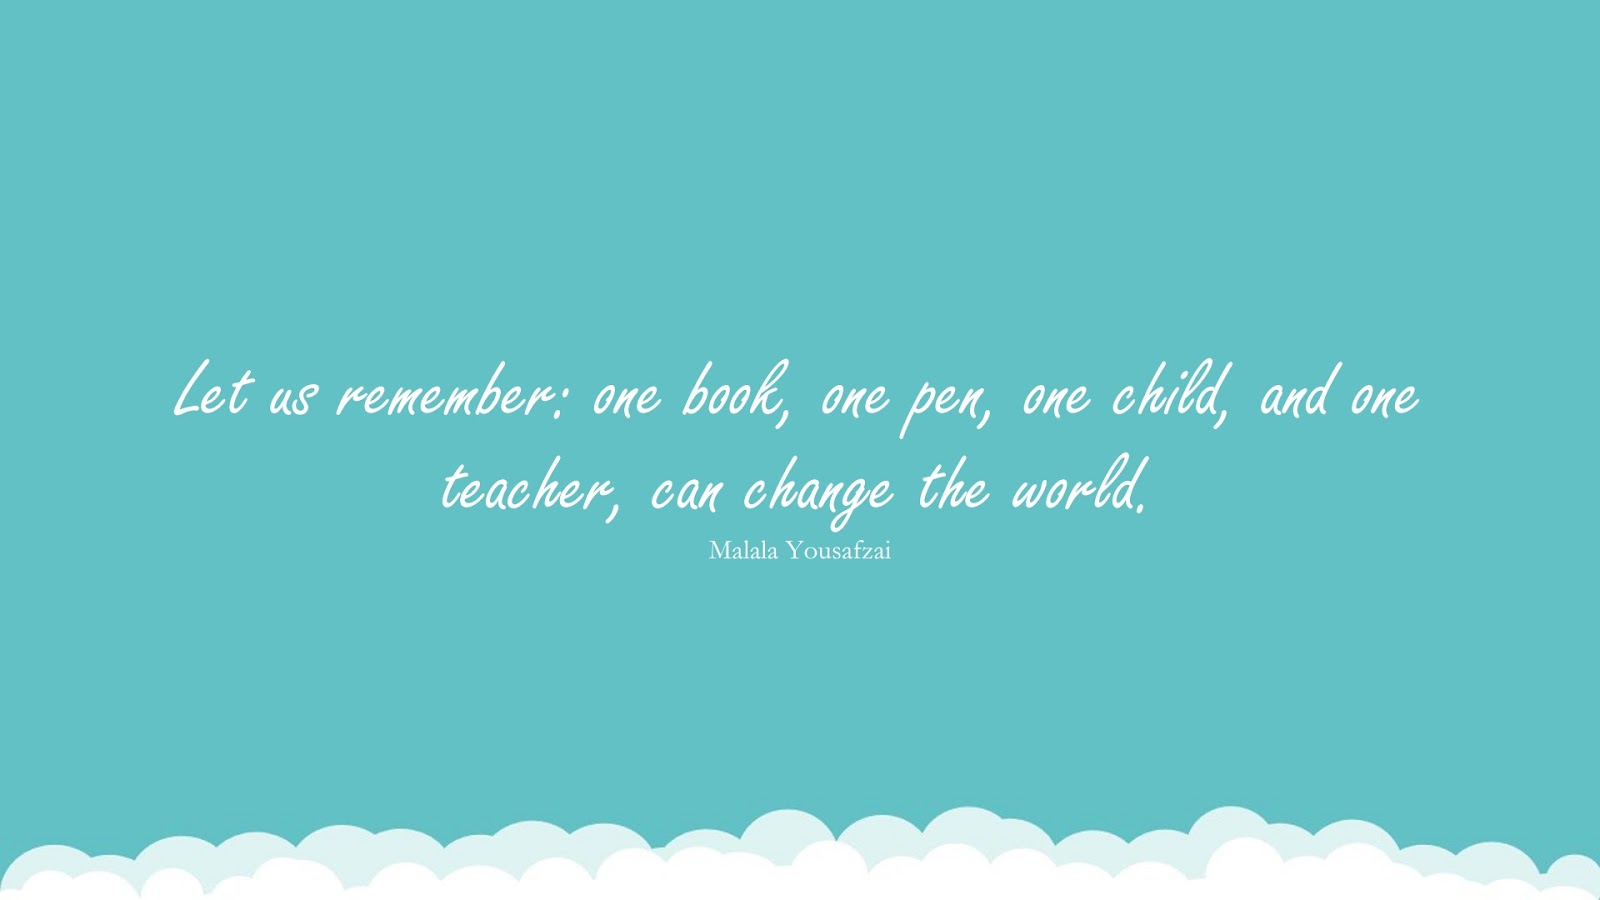 Let us remember: one book, one pen, one child, and one teacher, can change the world. (Malala Yousafzai);  #ChangeQuotes